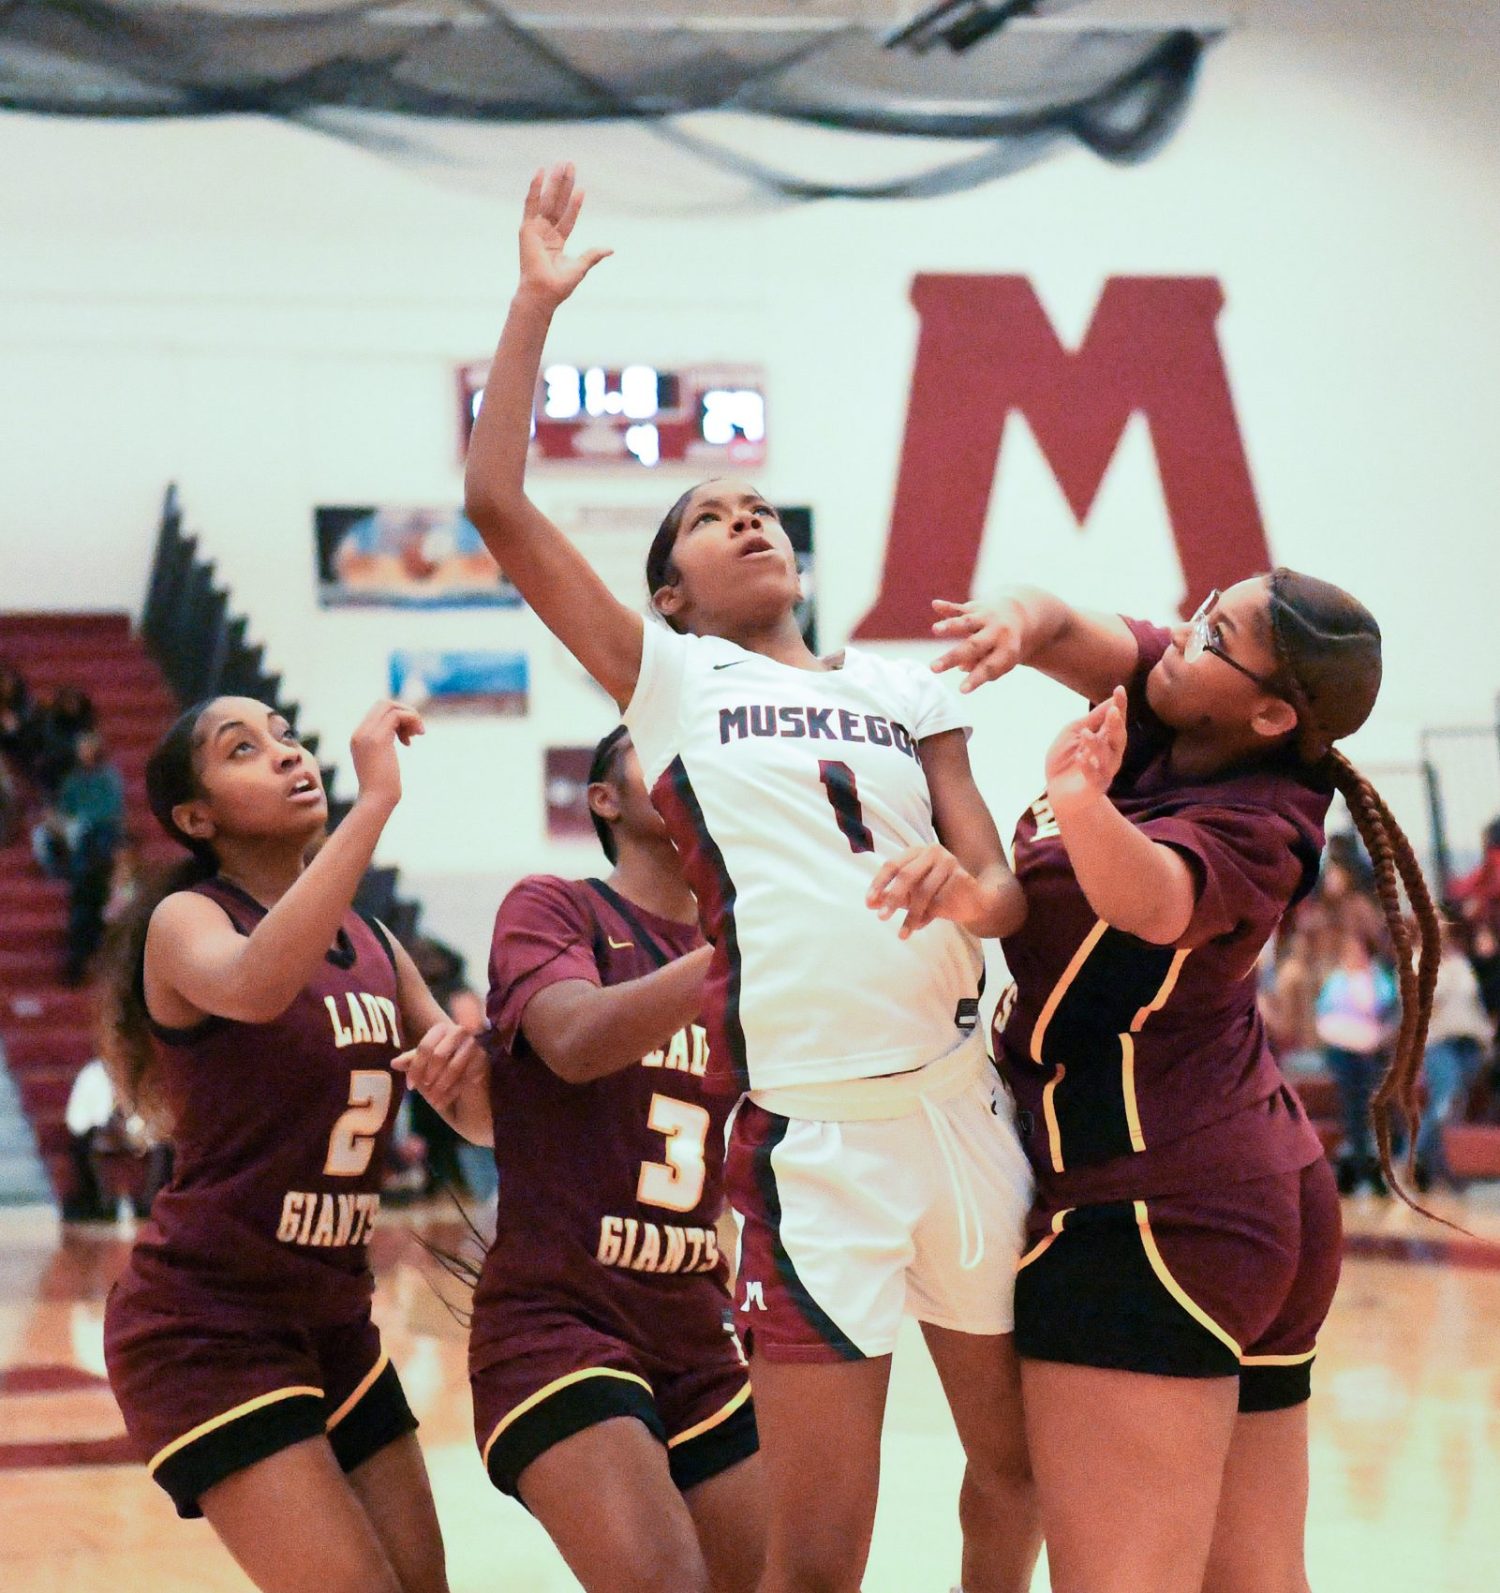 Muskegon Lady Reds take down Kalamazoo Central in girls opener